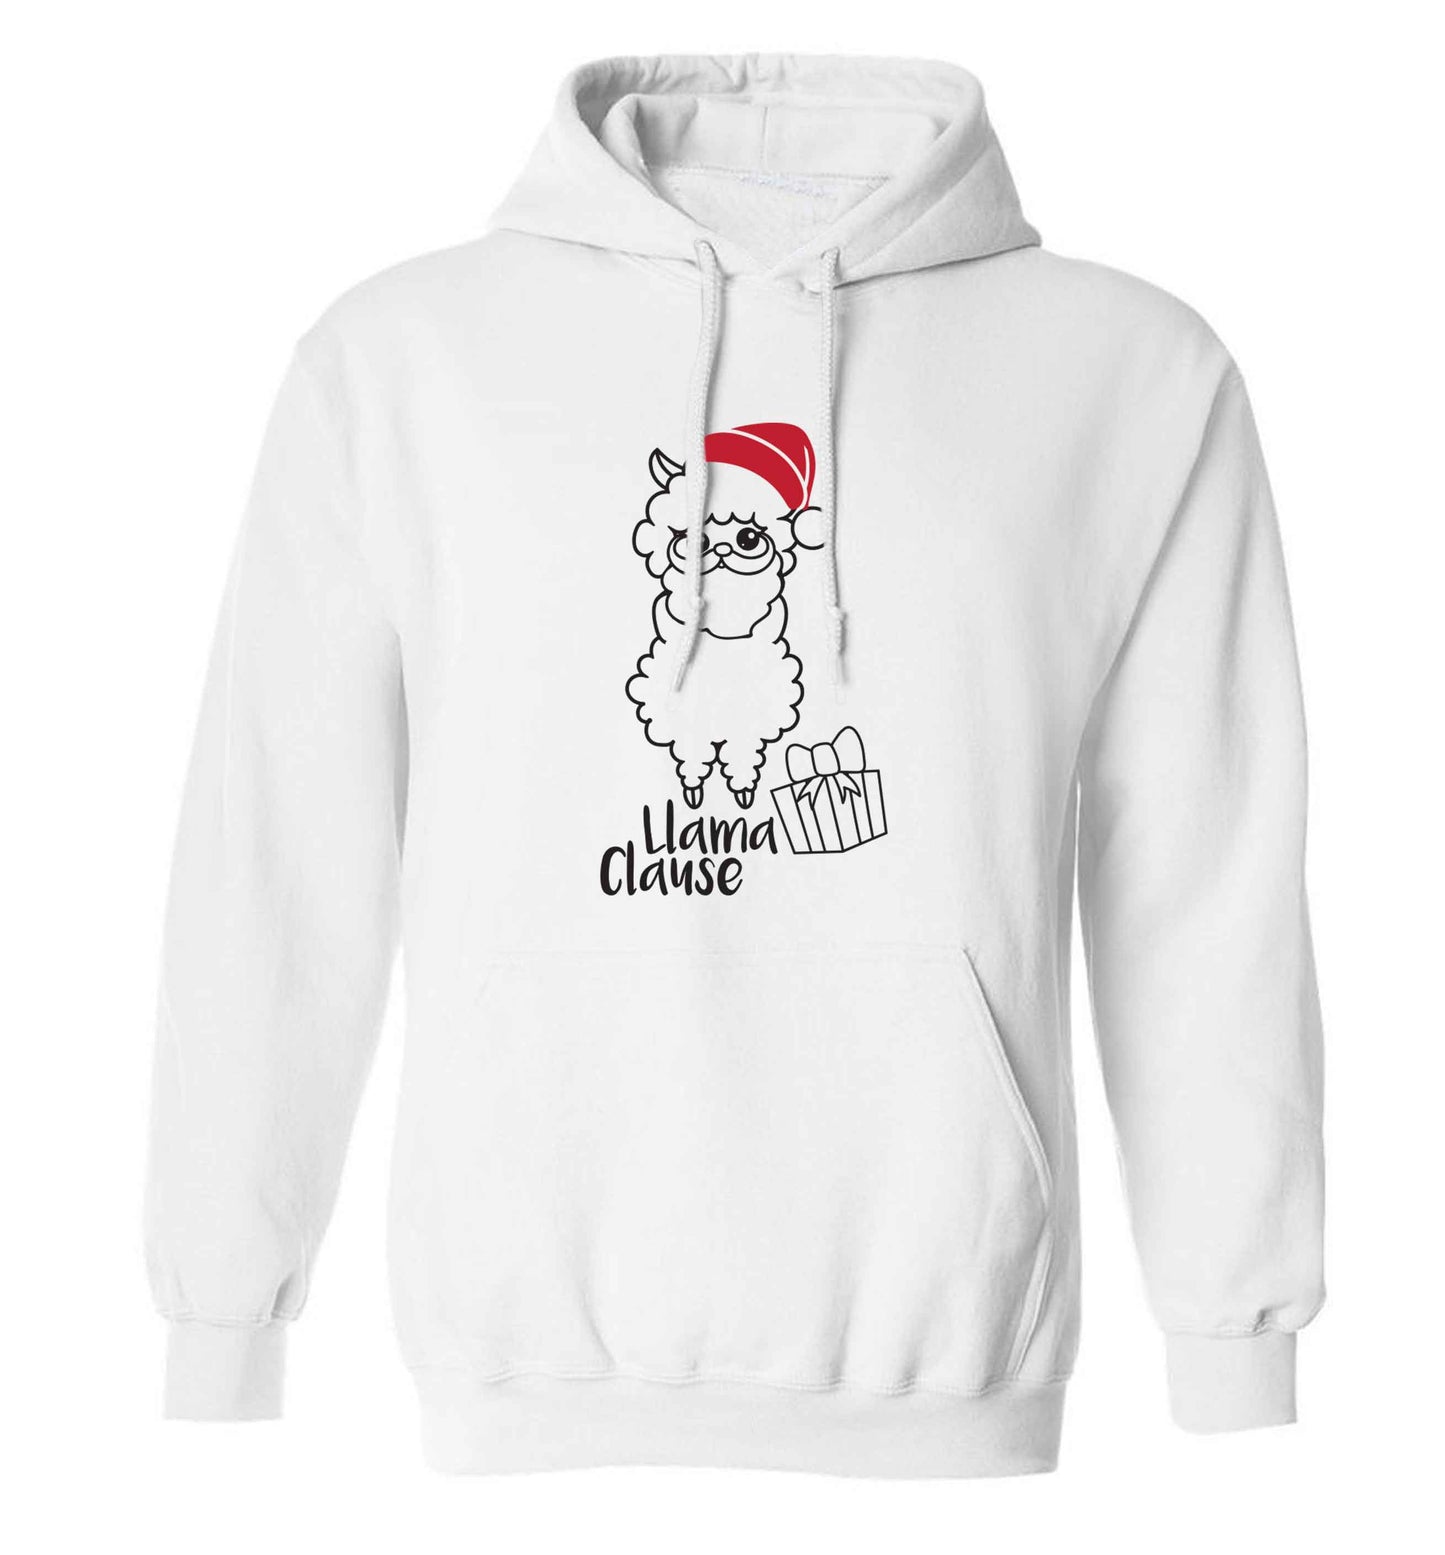 Llama Clause adults unisex white hoodie 2XL